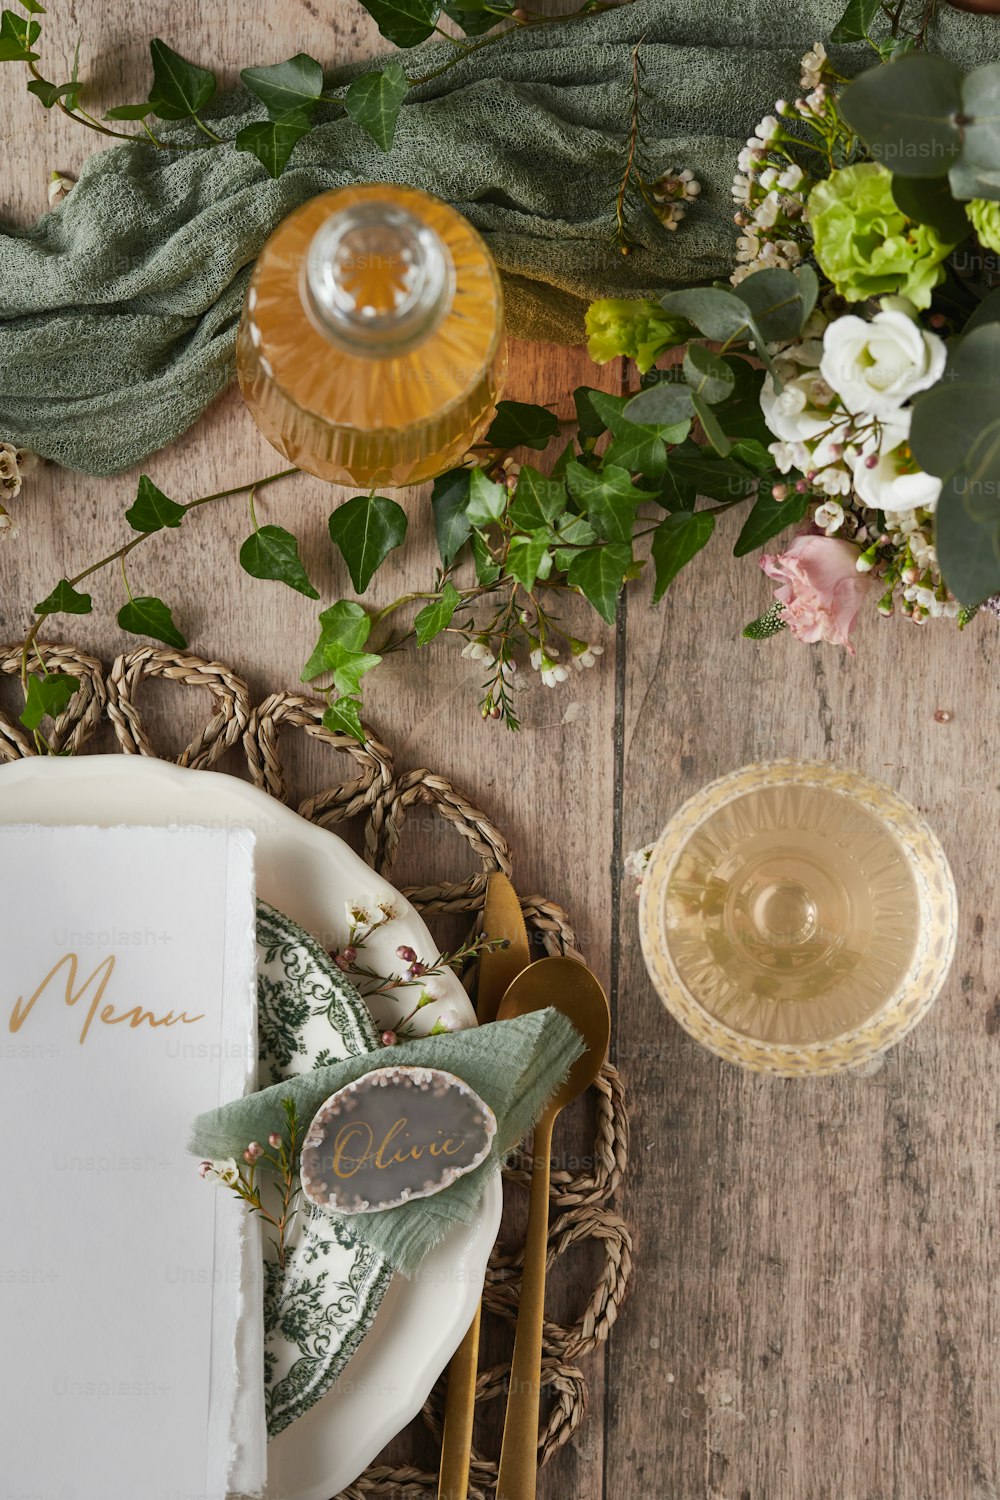 a place setting with a menu and flowers